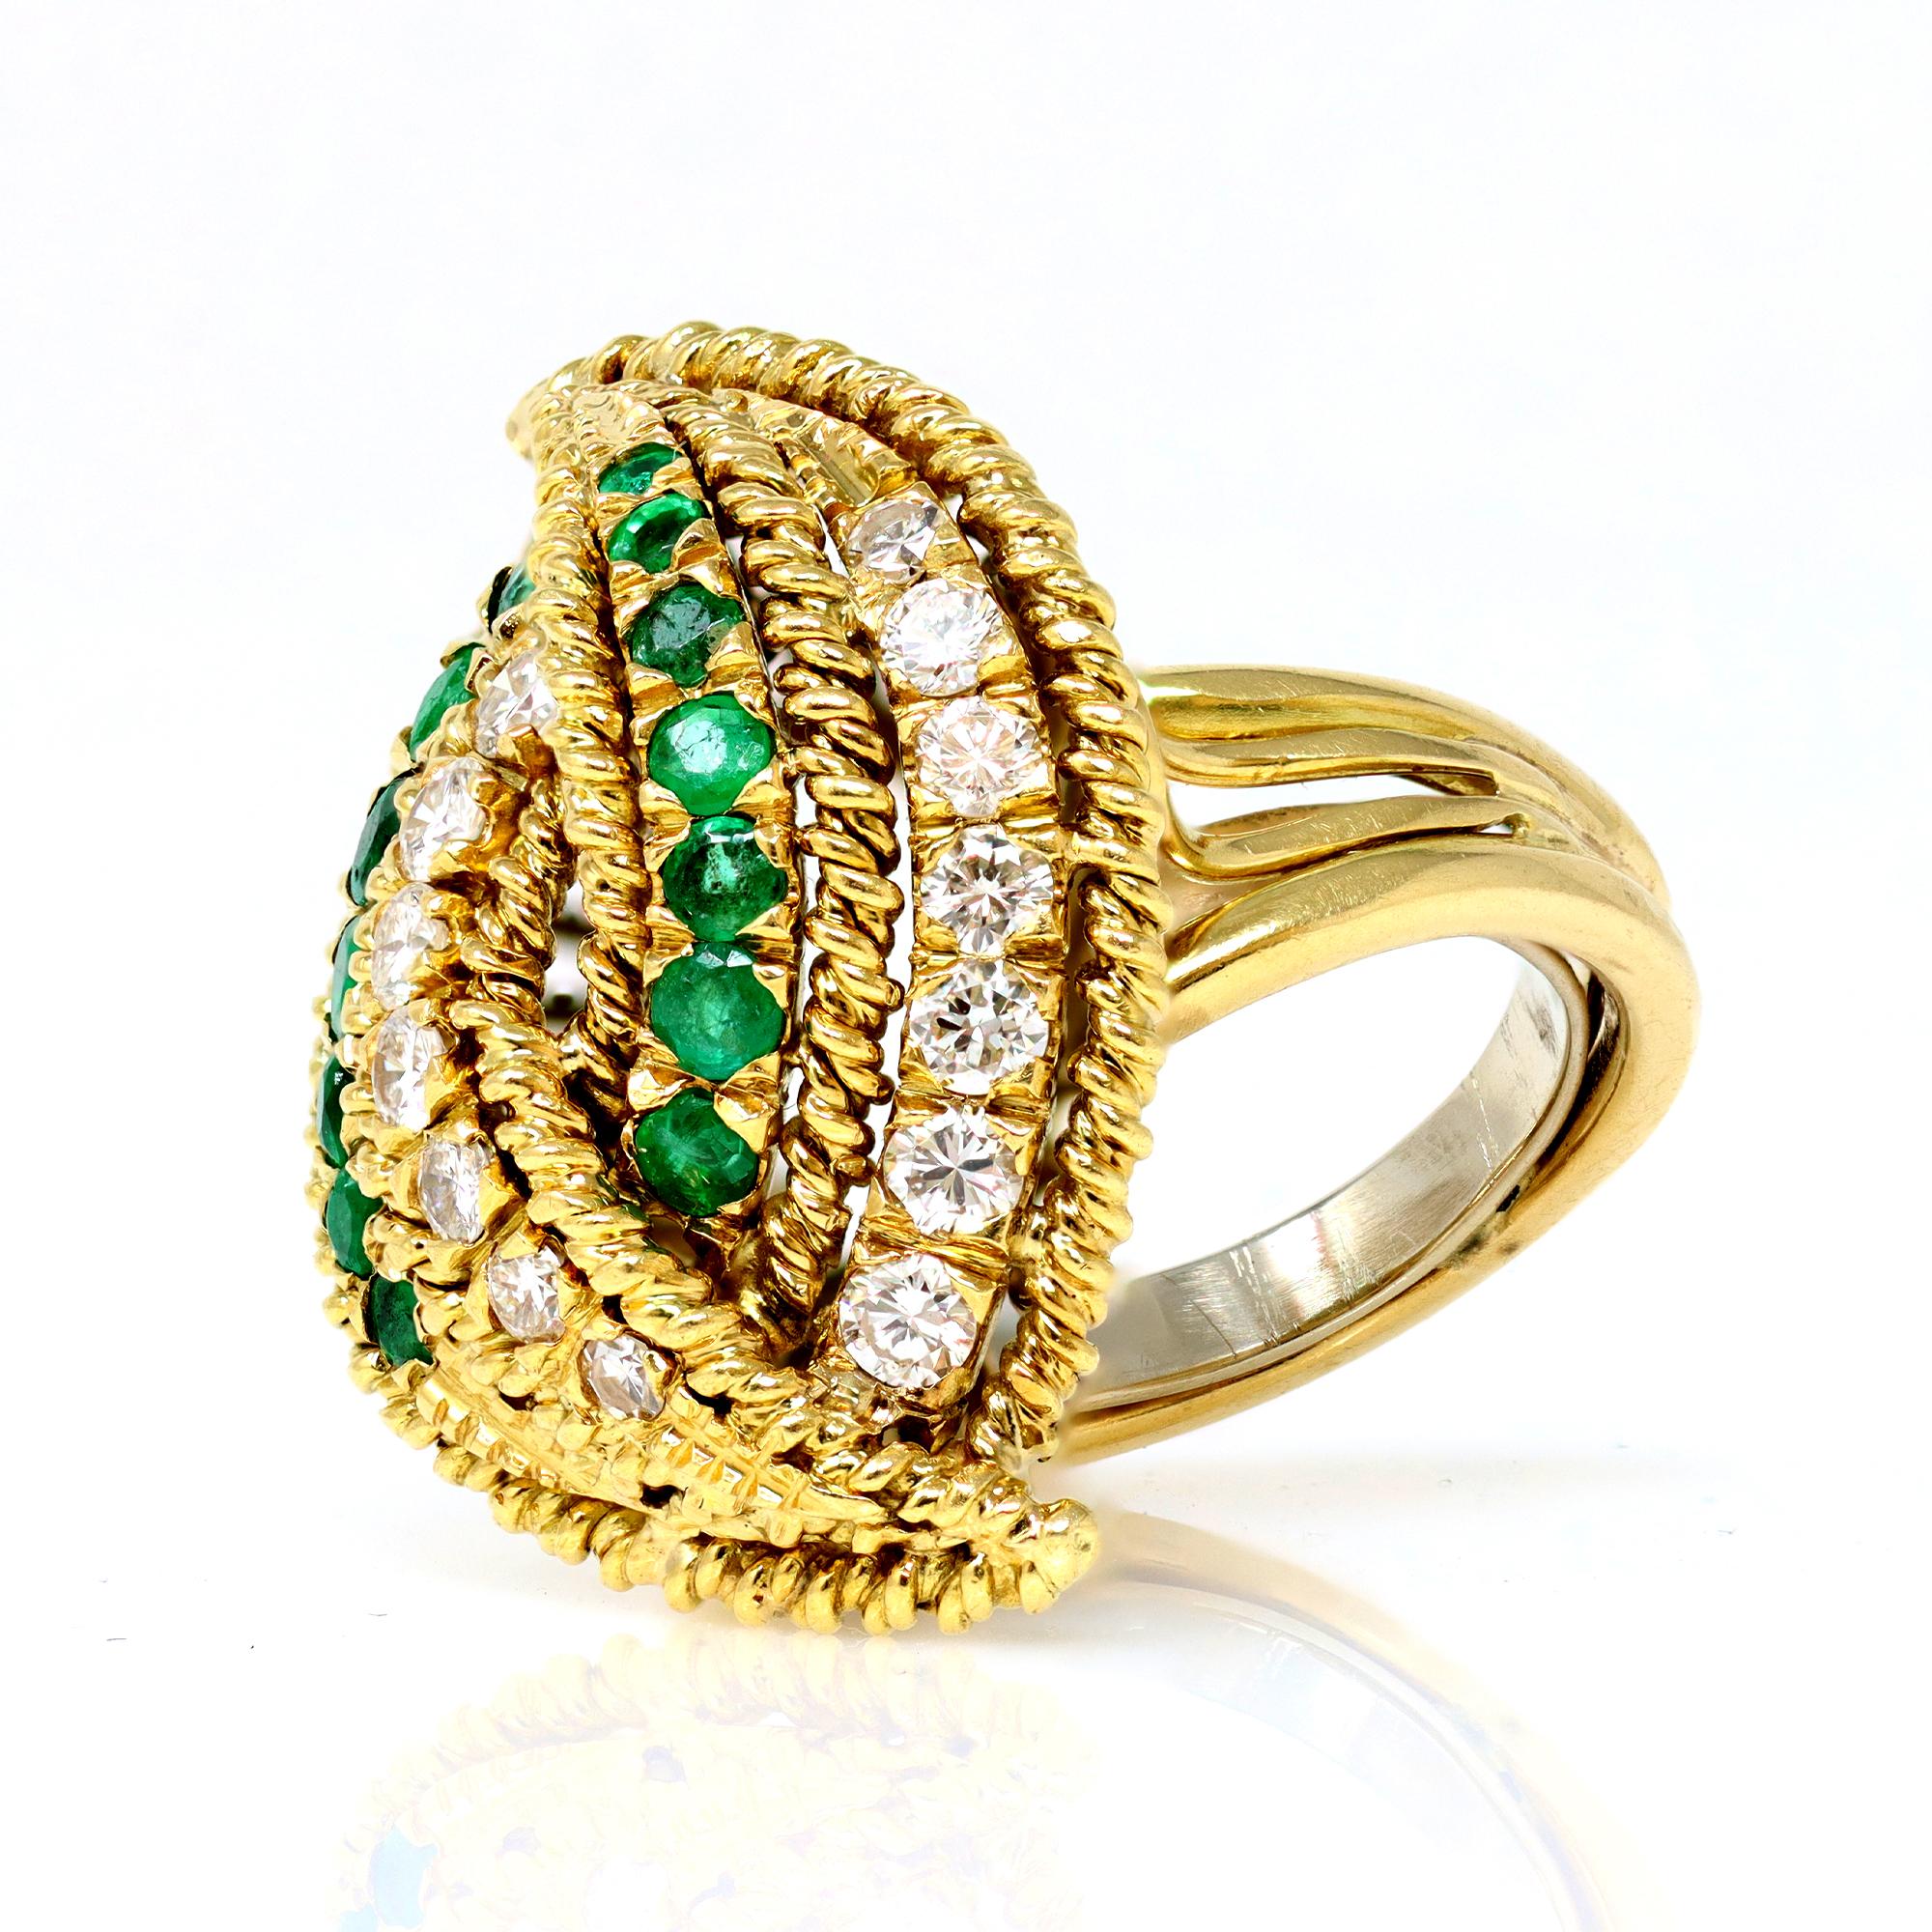 A cocktail ring Ca. 1970 featuring a bypass design with lines of diamonds and emeralds. The ring is hand executed in 18 karat yellow gold. The diamonds are full cut round shape with an estimated weight of 0.60 carats, GH color and VS-SI clarity. The